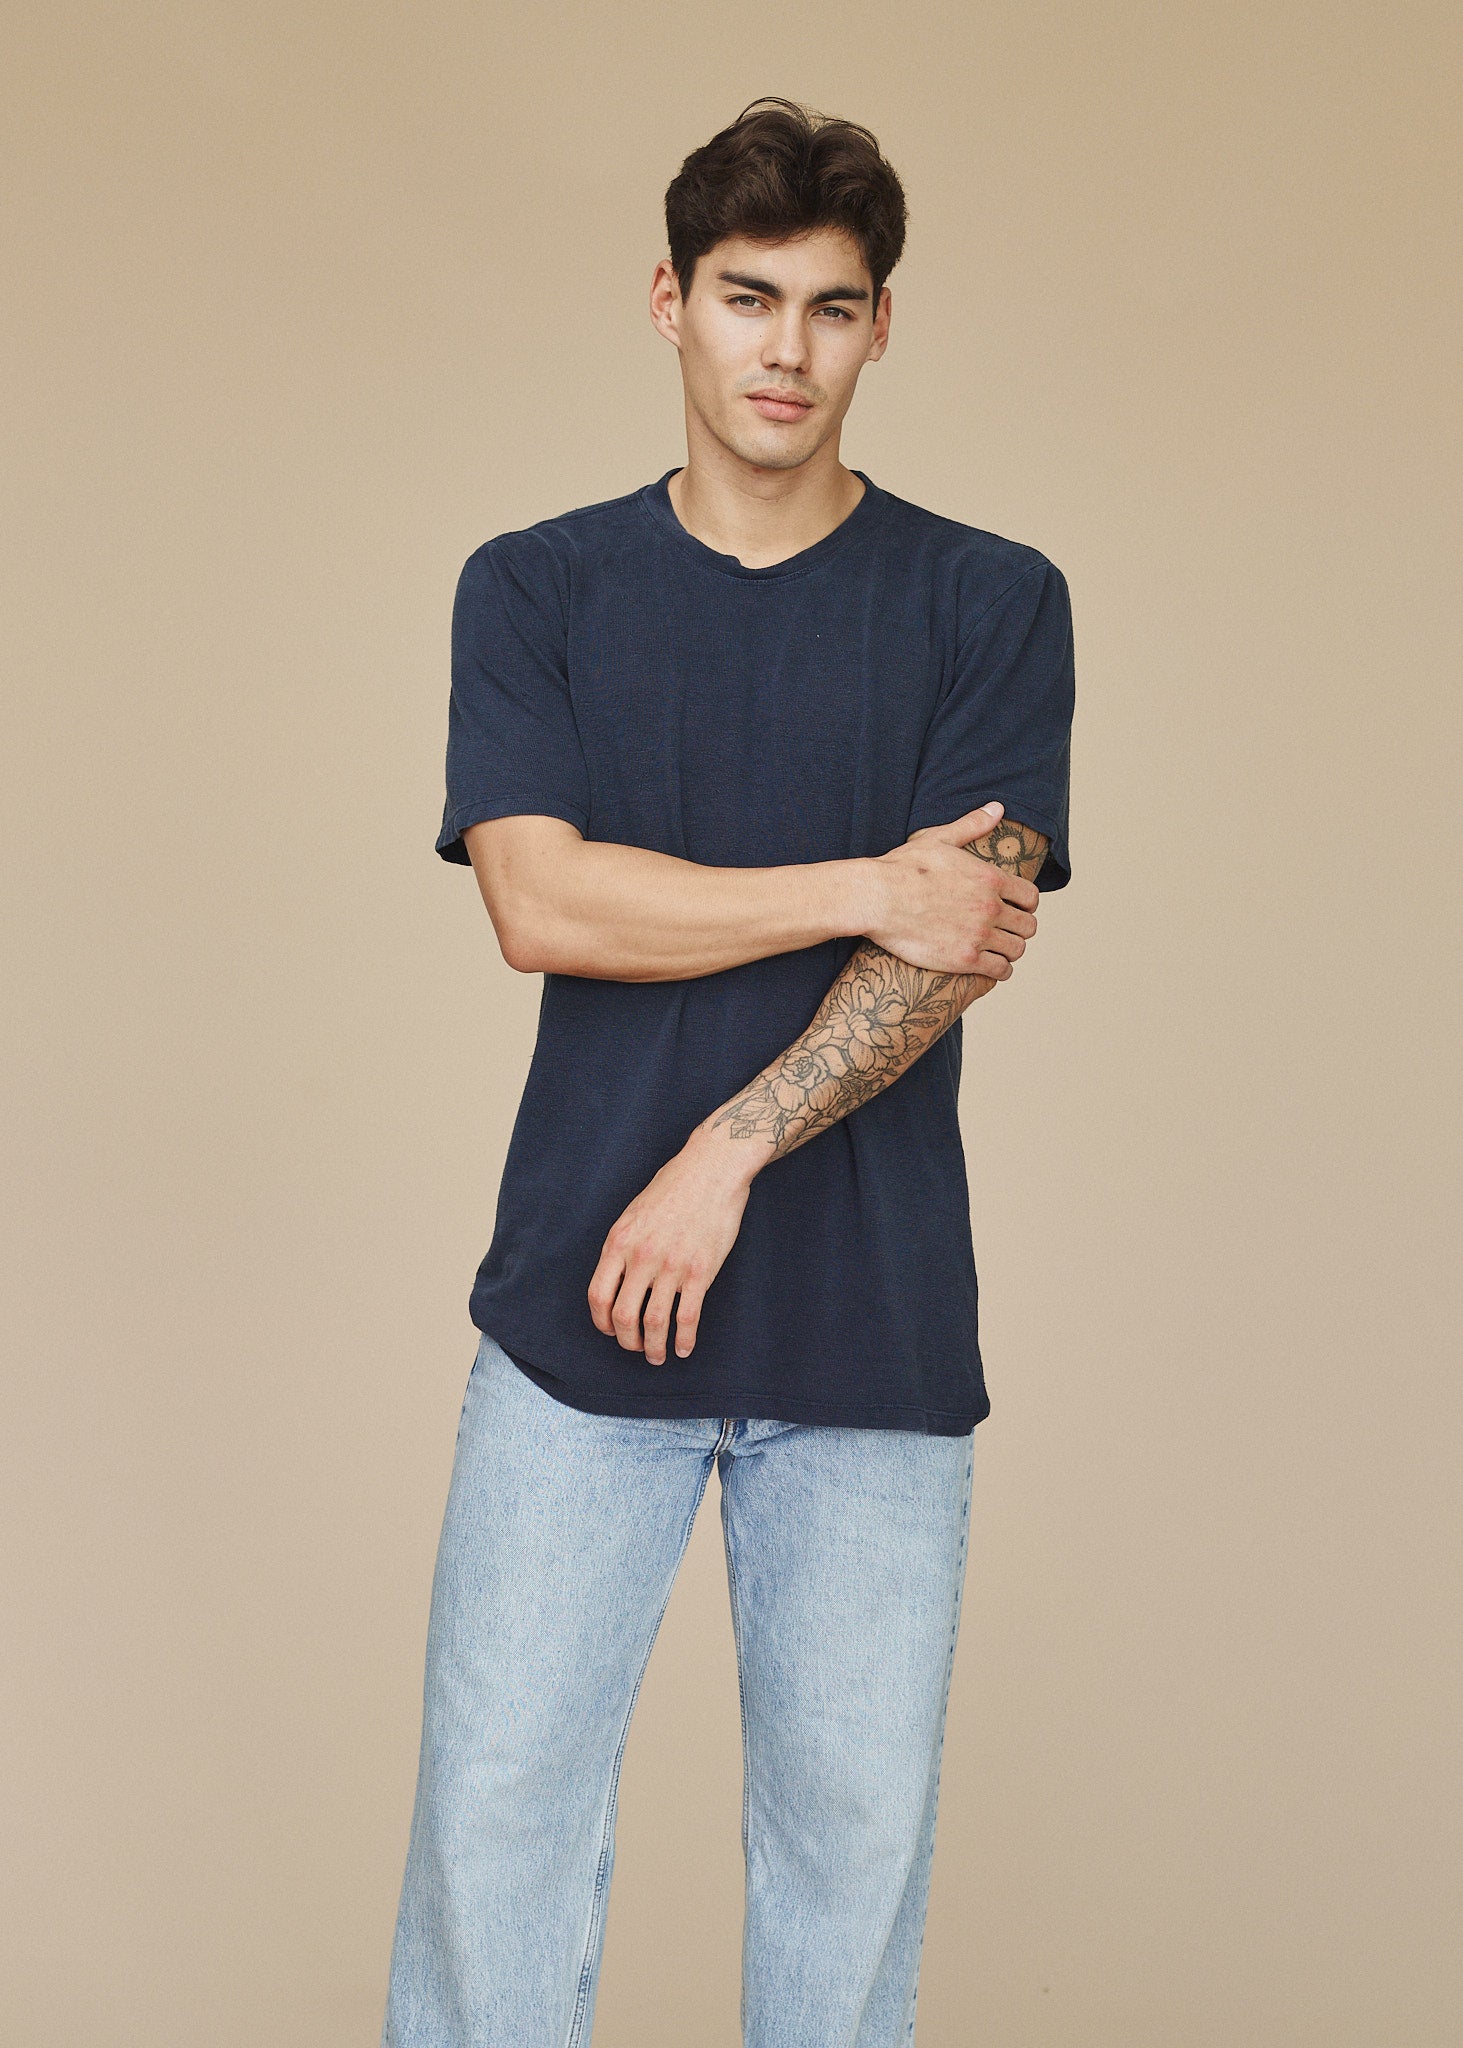 Relaxed Hemp Cotton Pocket Tee in Sand – Marine Layer